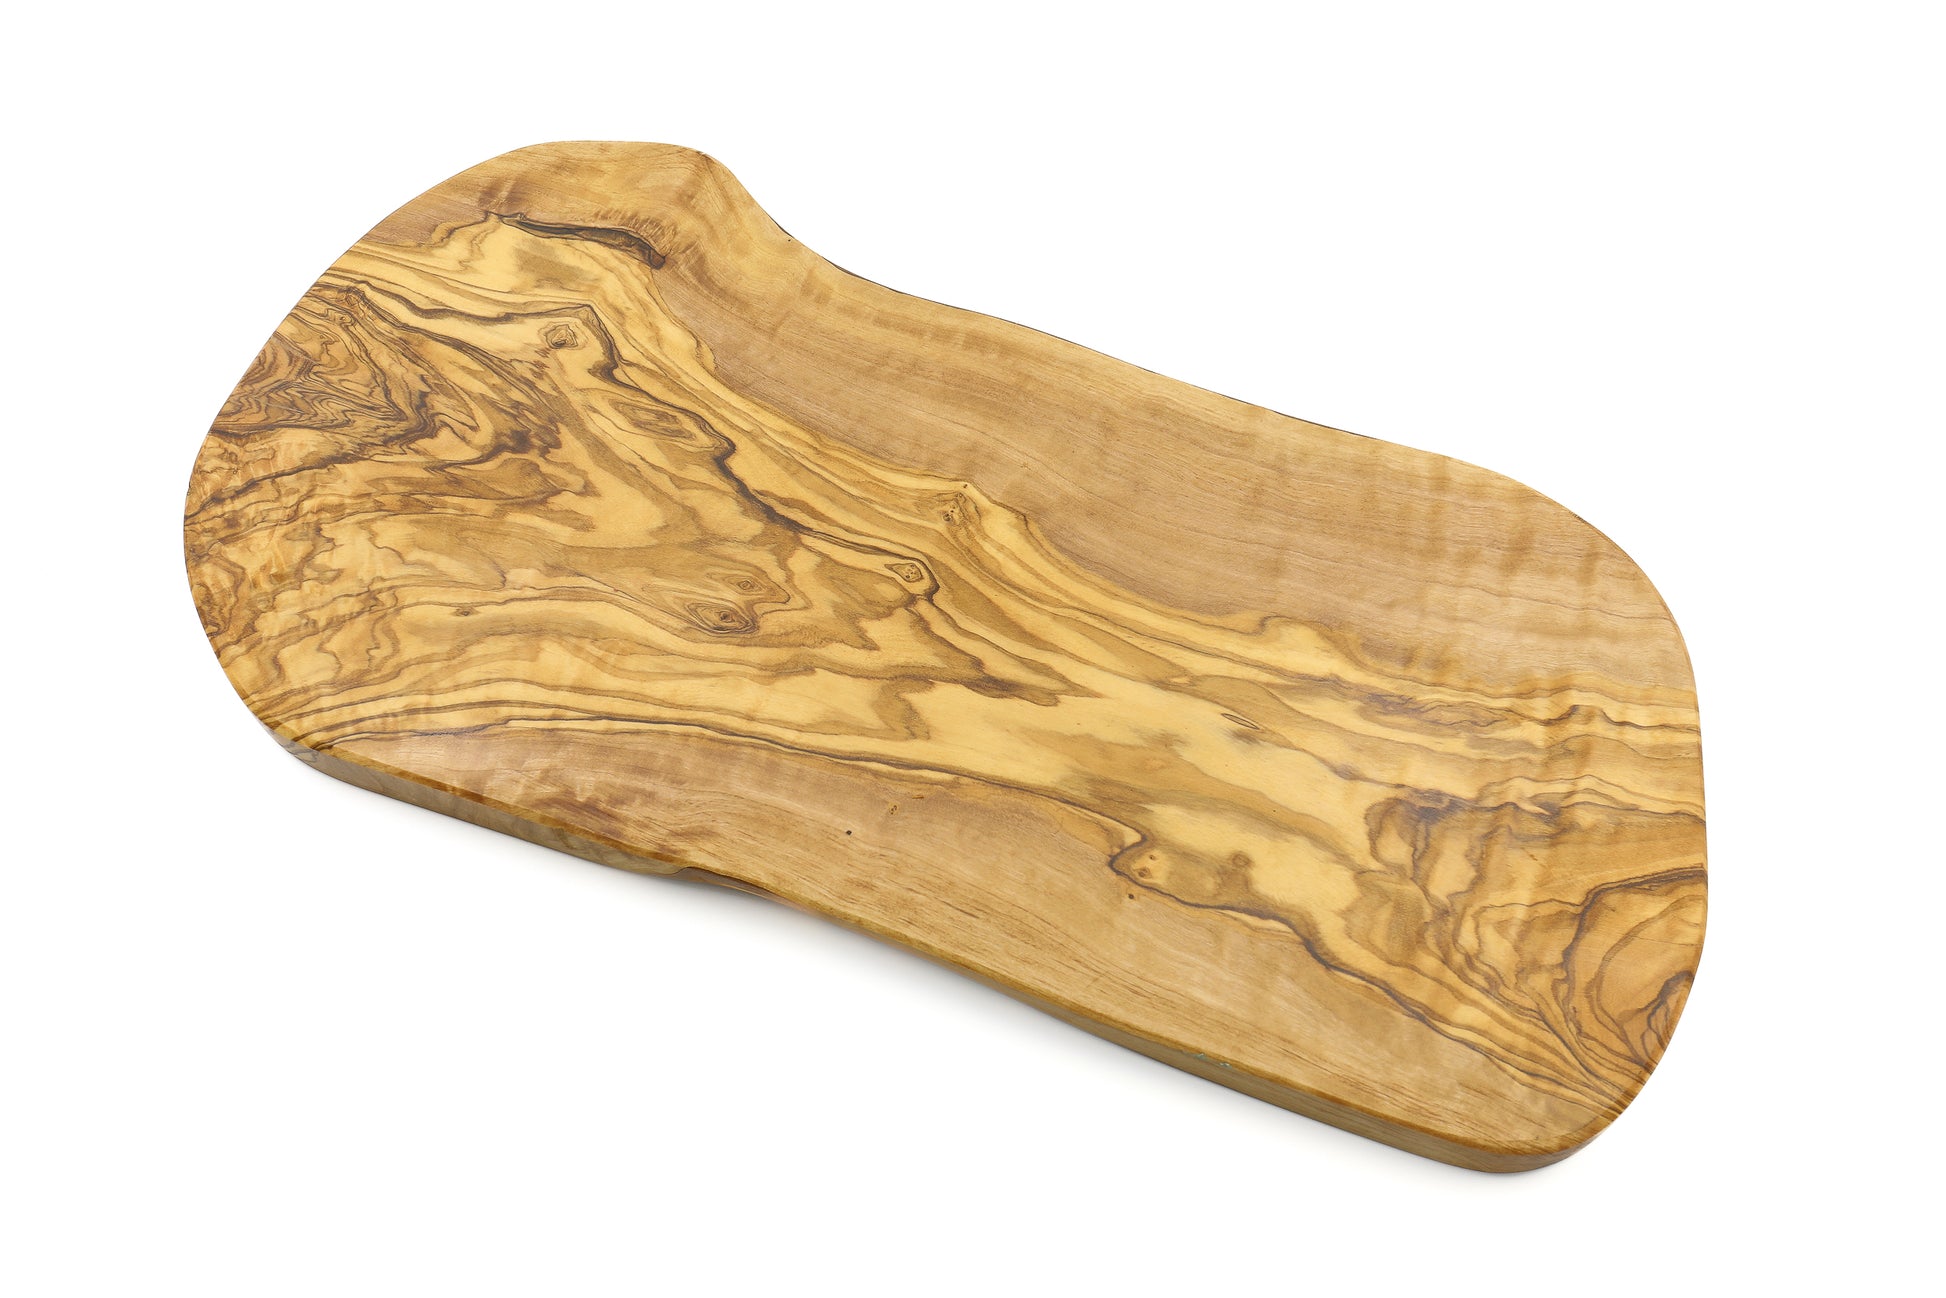 Artisanal Olive Wood Cutting Board - Embracing an Organic and Rustic Form